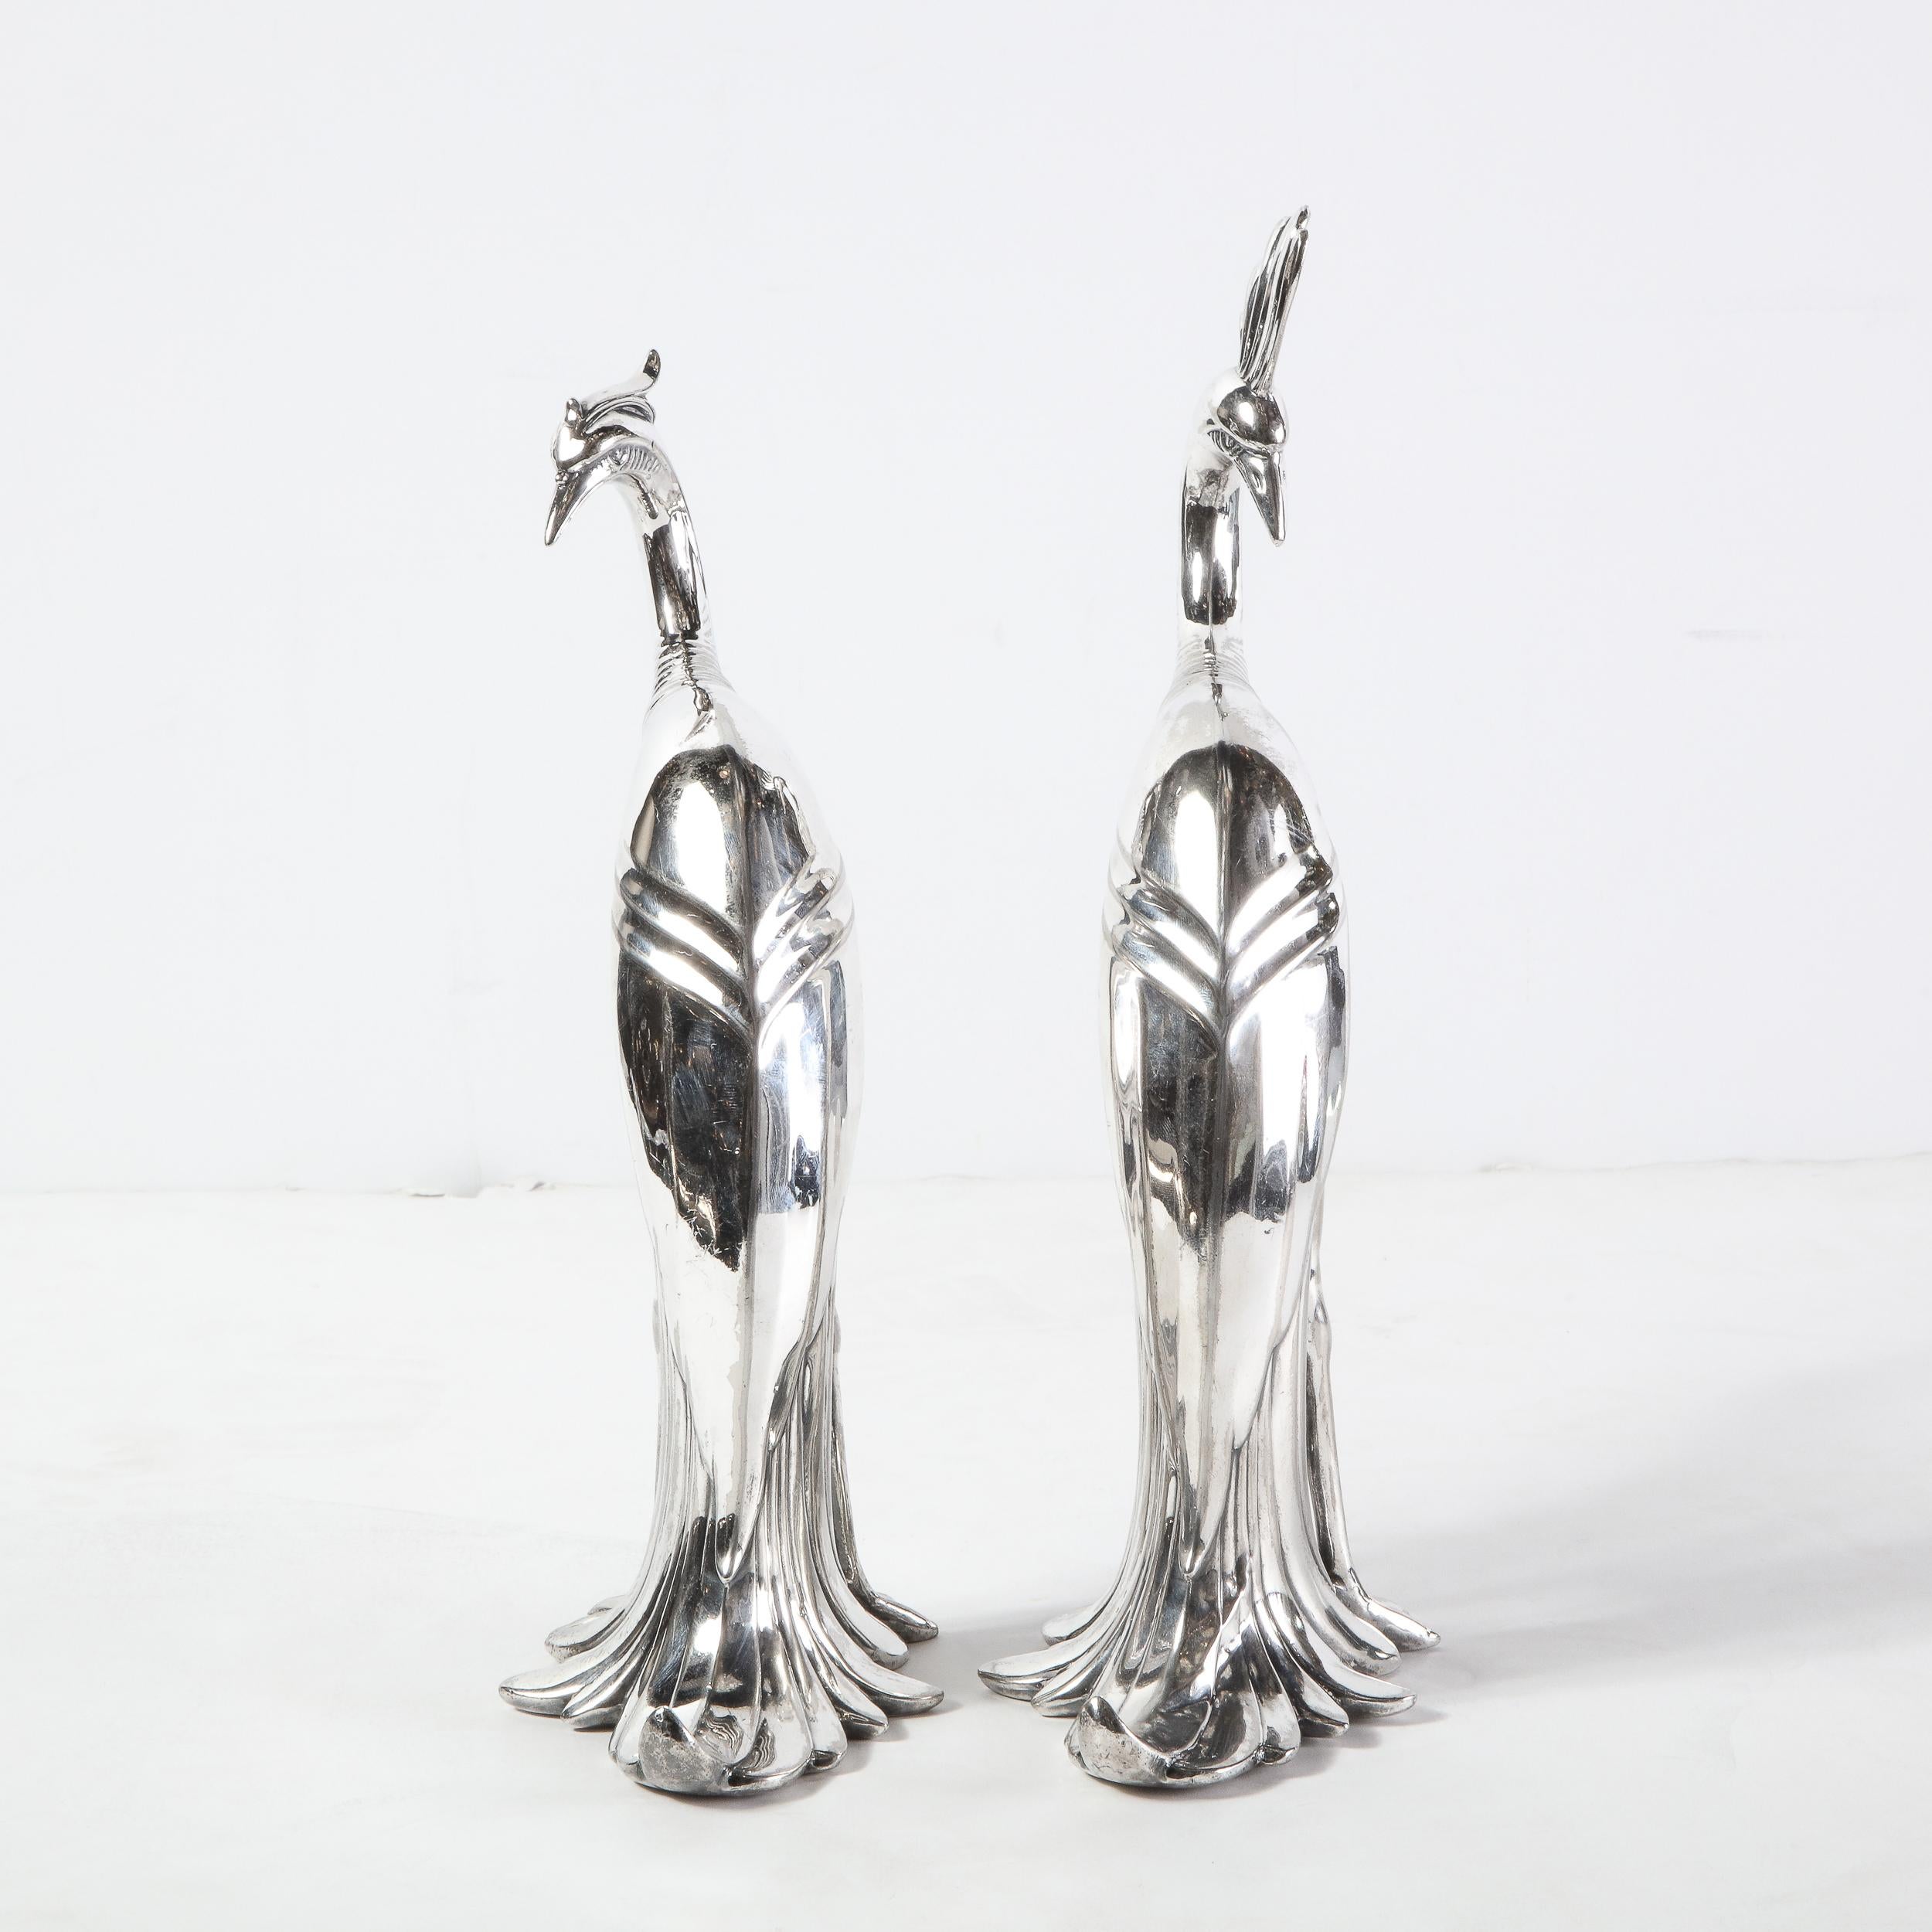 Pair of 1930s Art Deco Silverplated Stylized Peacock Sculptures by Weidlich Bros 4